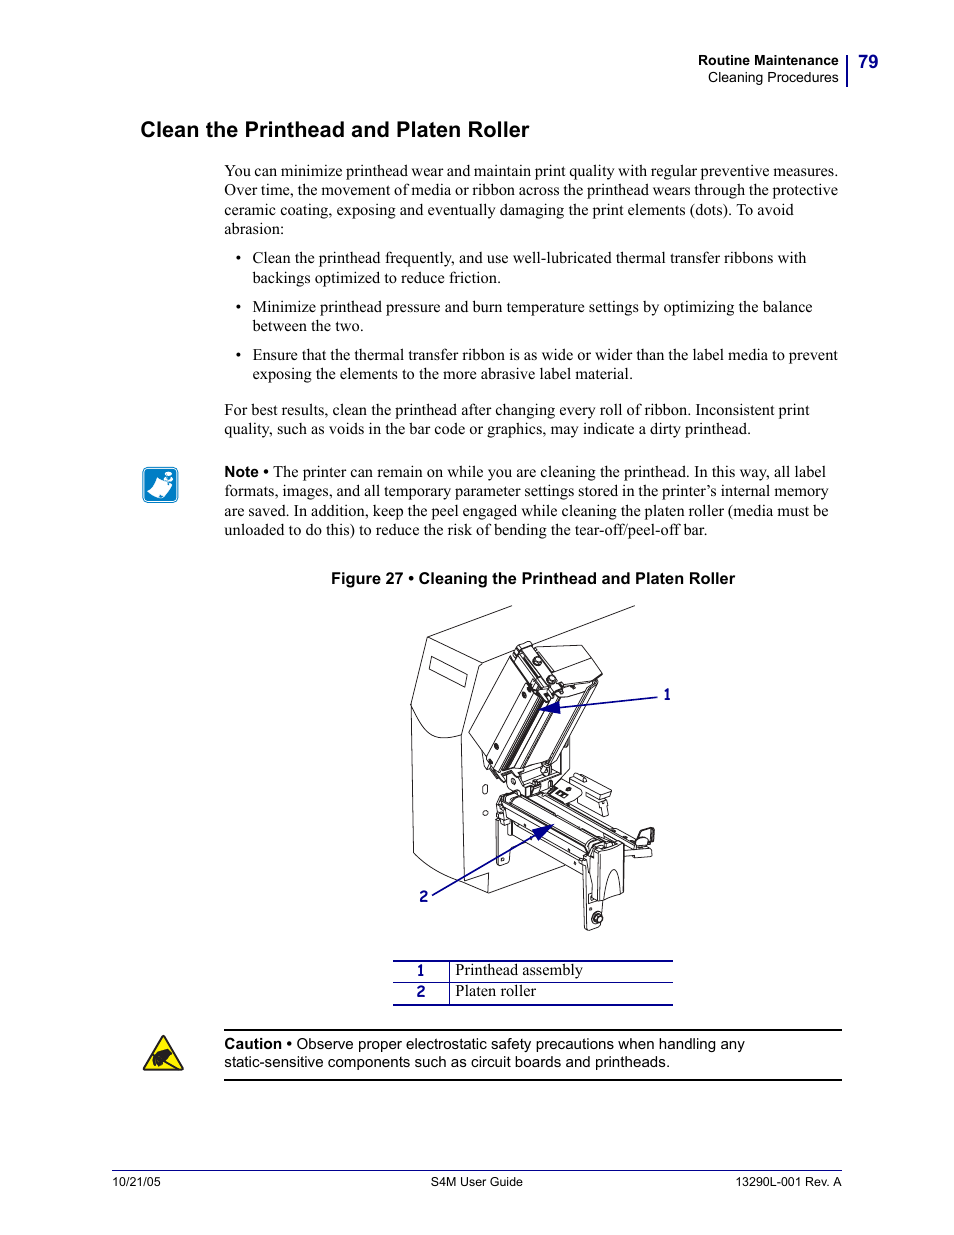 Clean the printhead and platen roller | Zebra S4M User Manual | Page 85 /  132